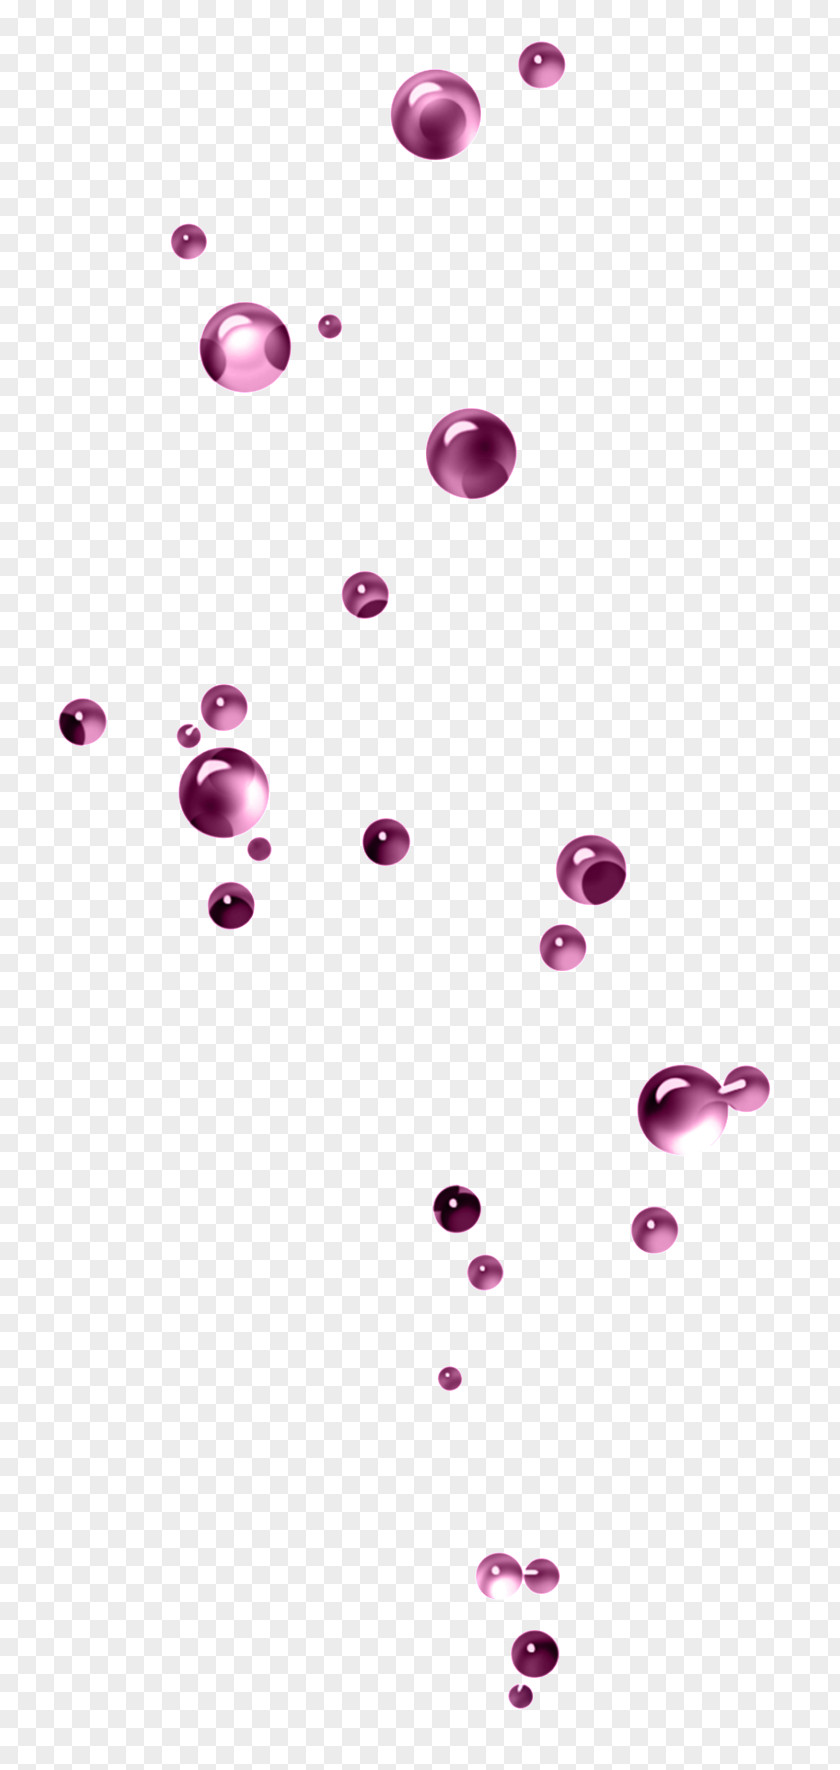 Made Soap Bubble Image Adobe Photoshop PNG